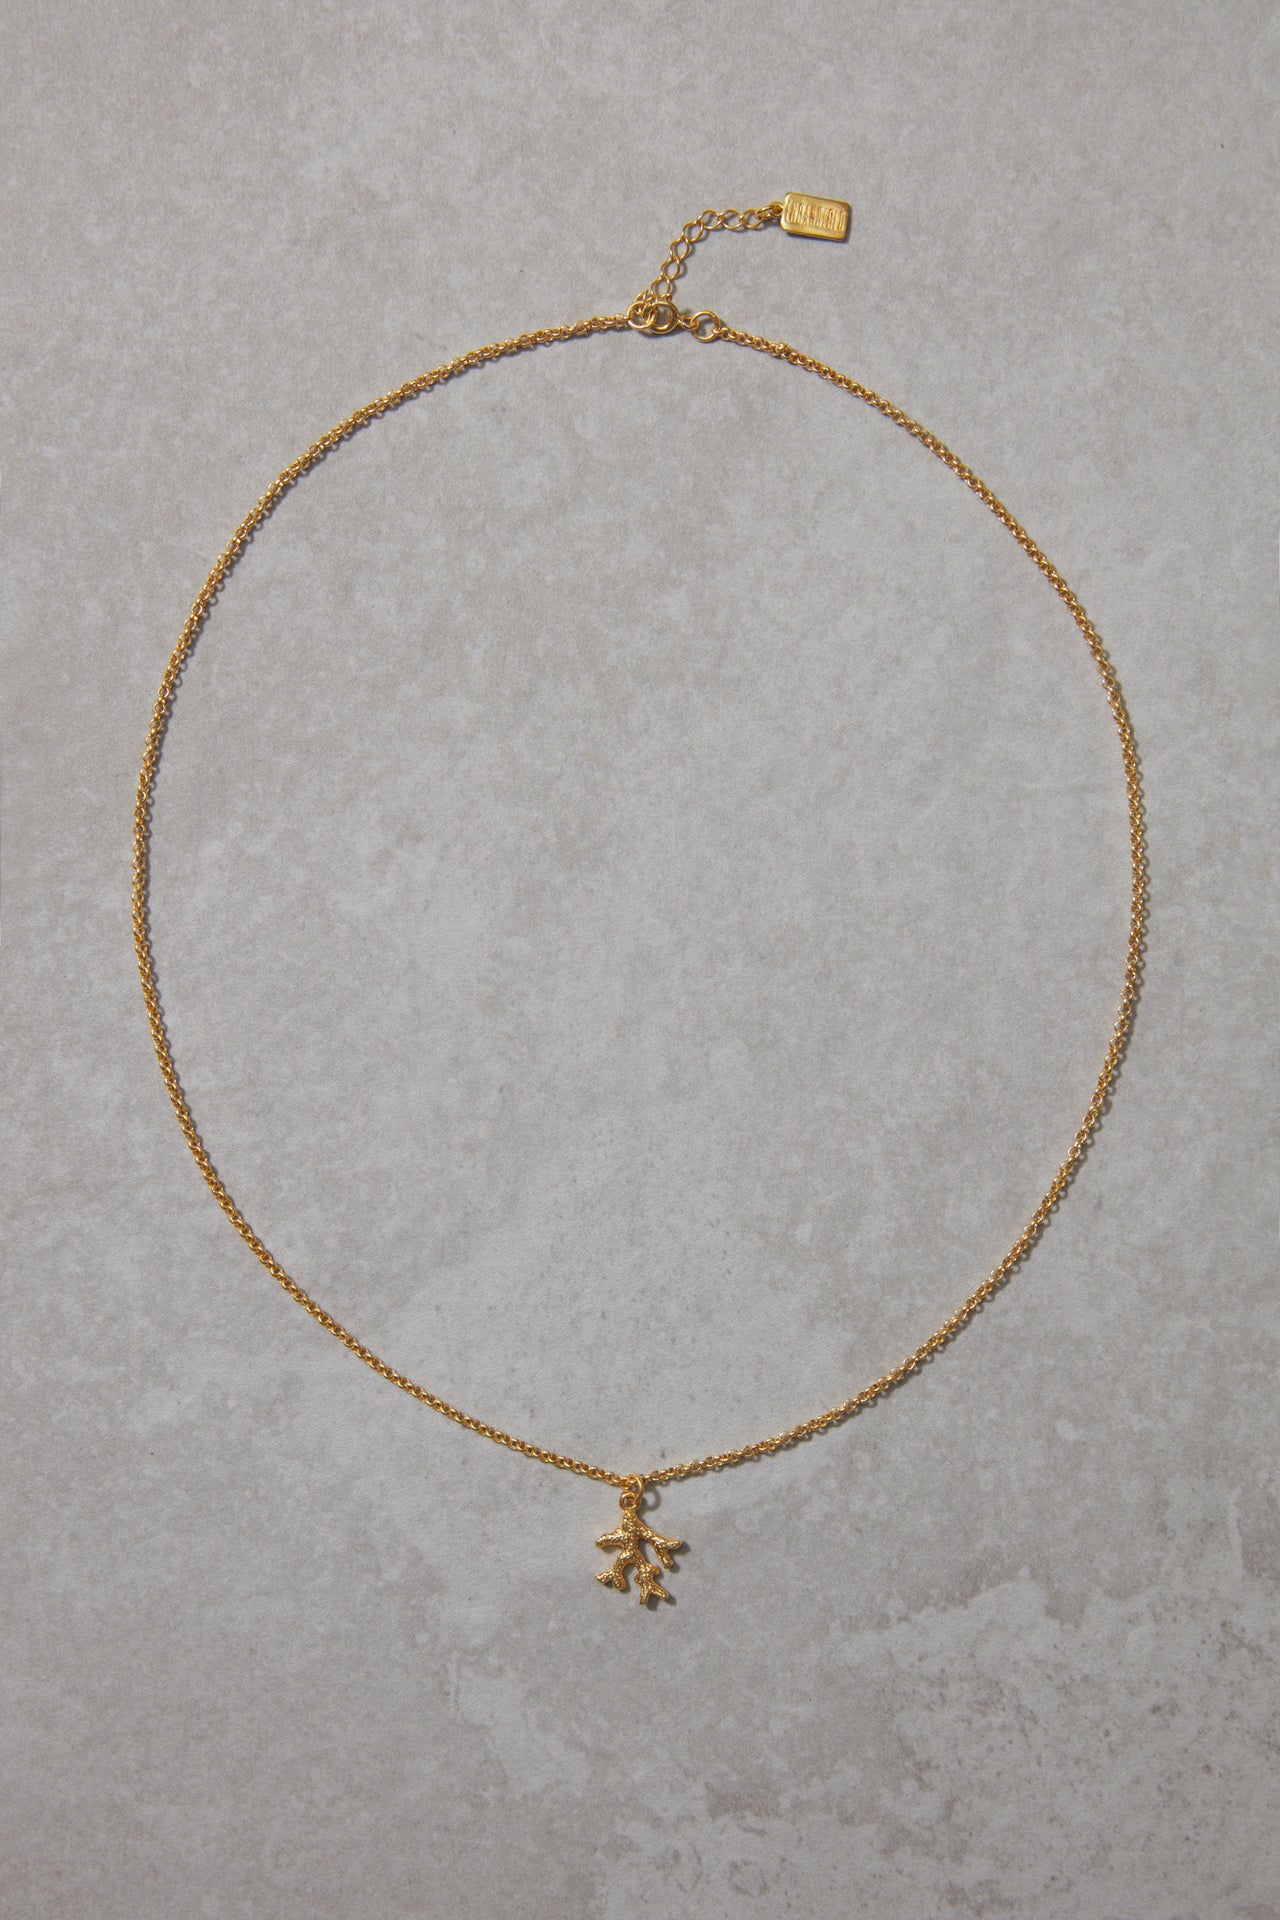 Staghorn coral necklace